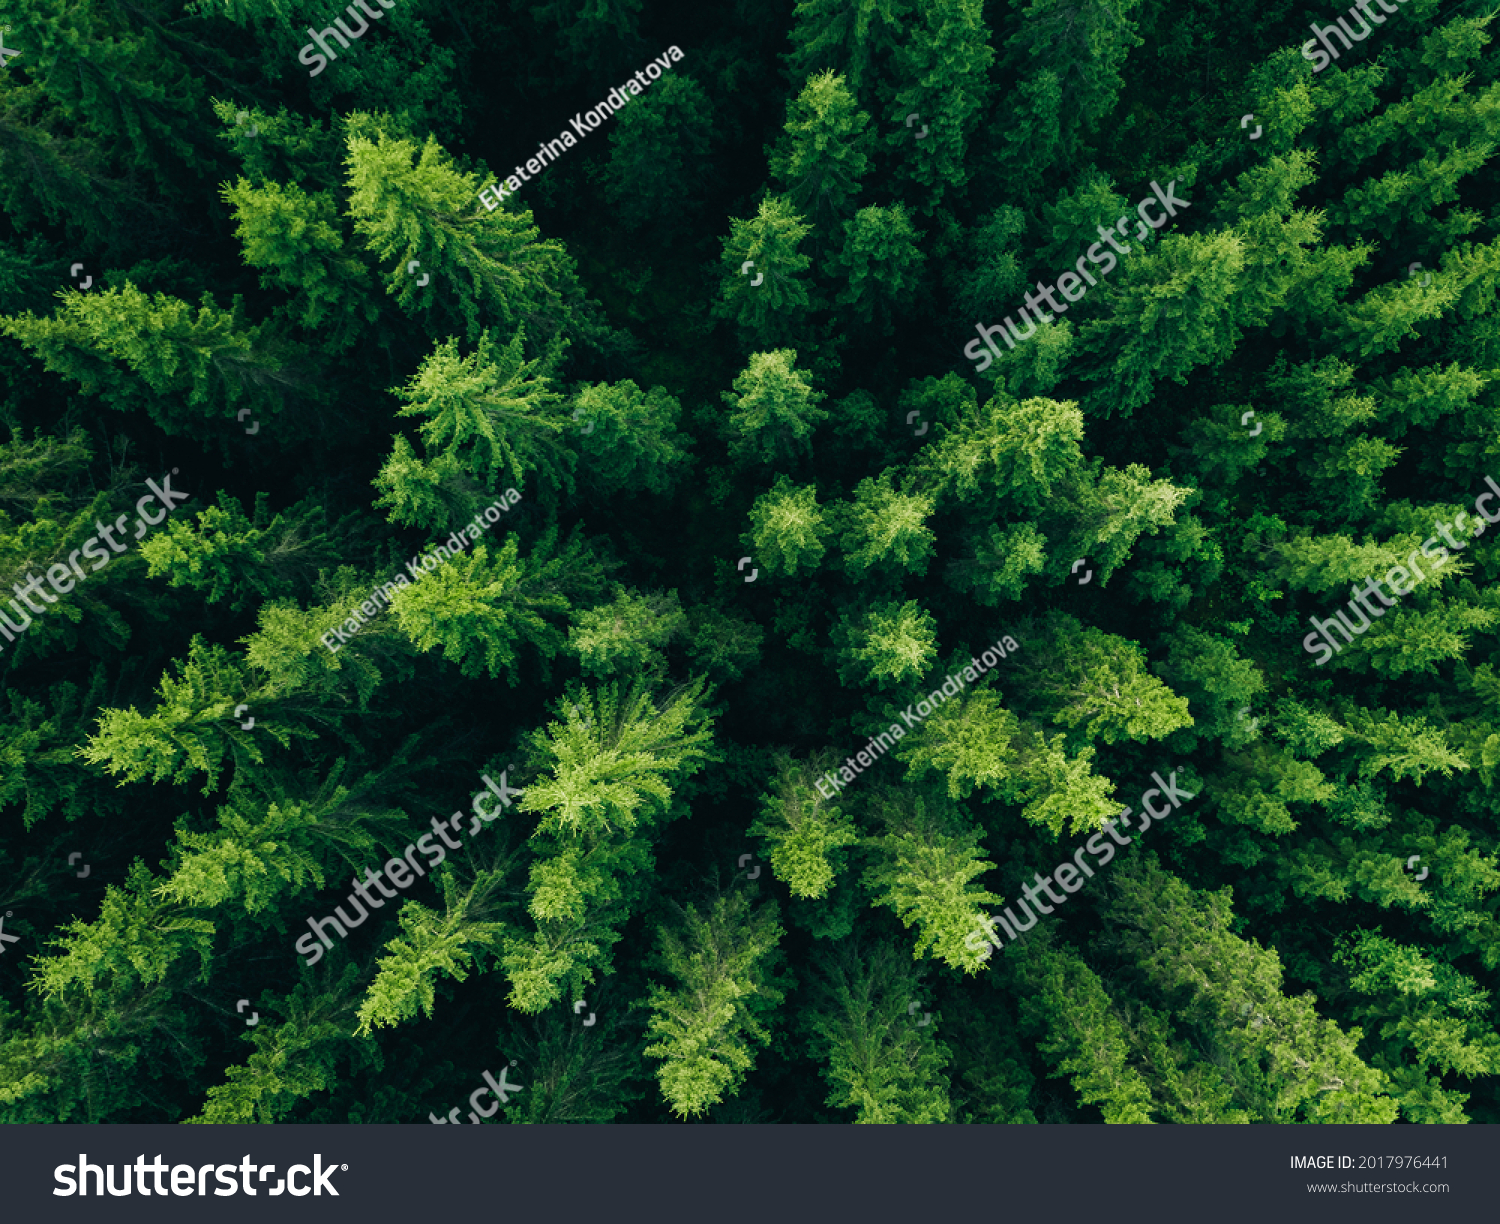 Aerial view of green summer forest with spruce and pine trees in Finland. #2017976441